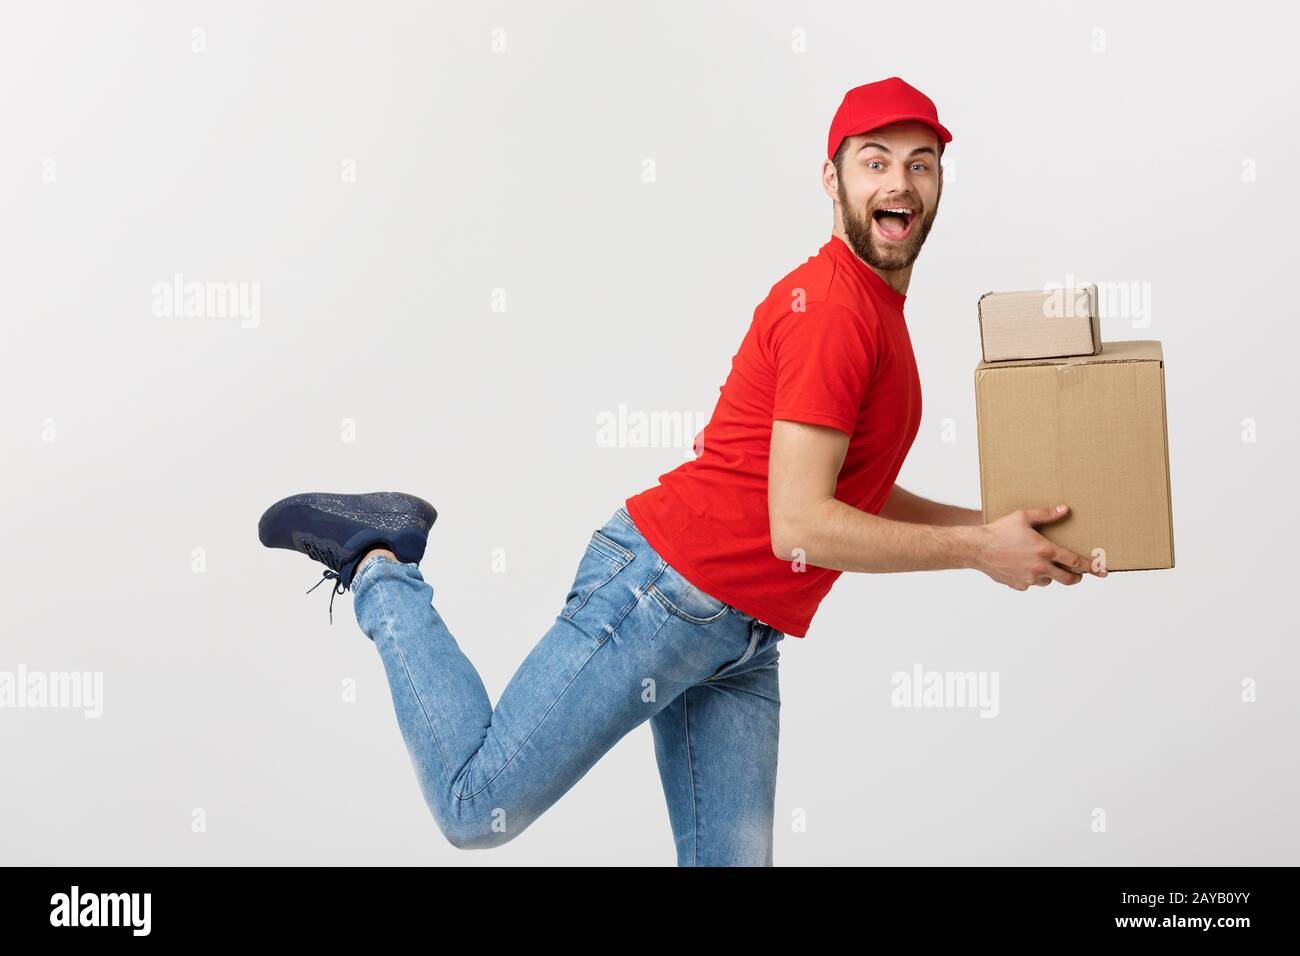 Delivery Concept Handsome Caucasian Delivery Man Rush Running For Delivering A Package For